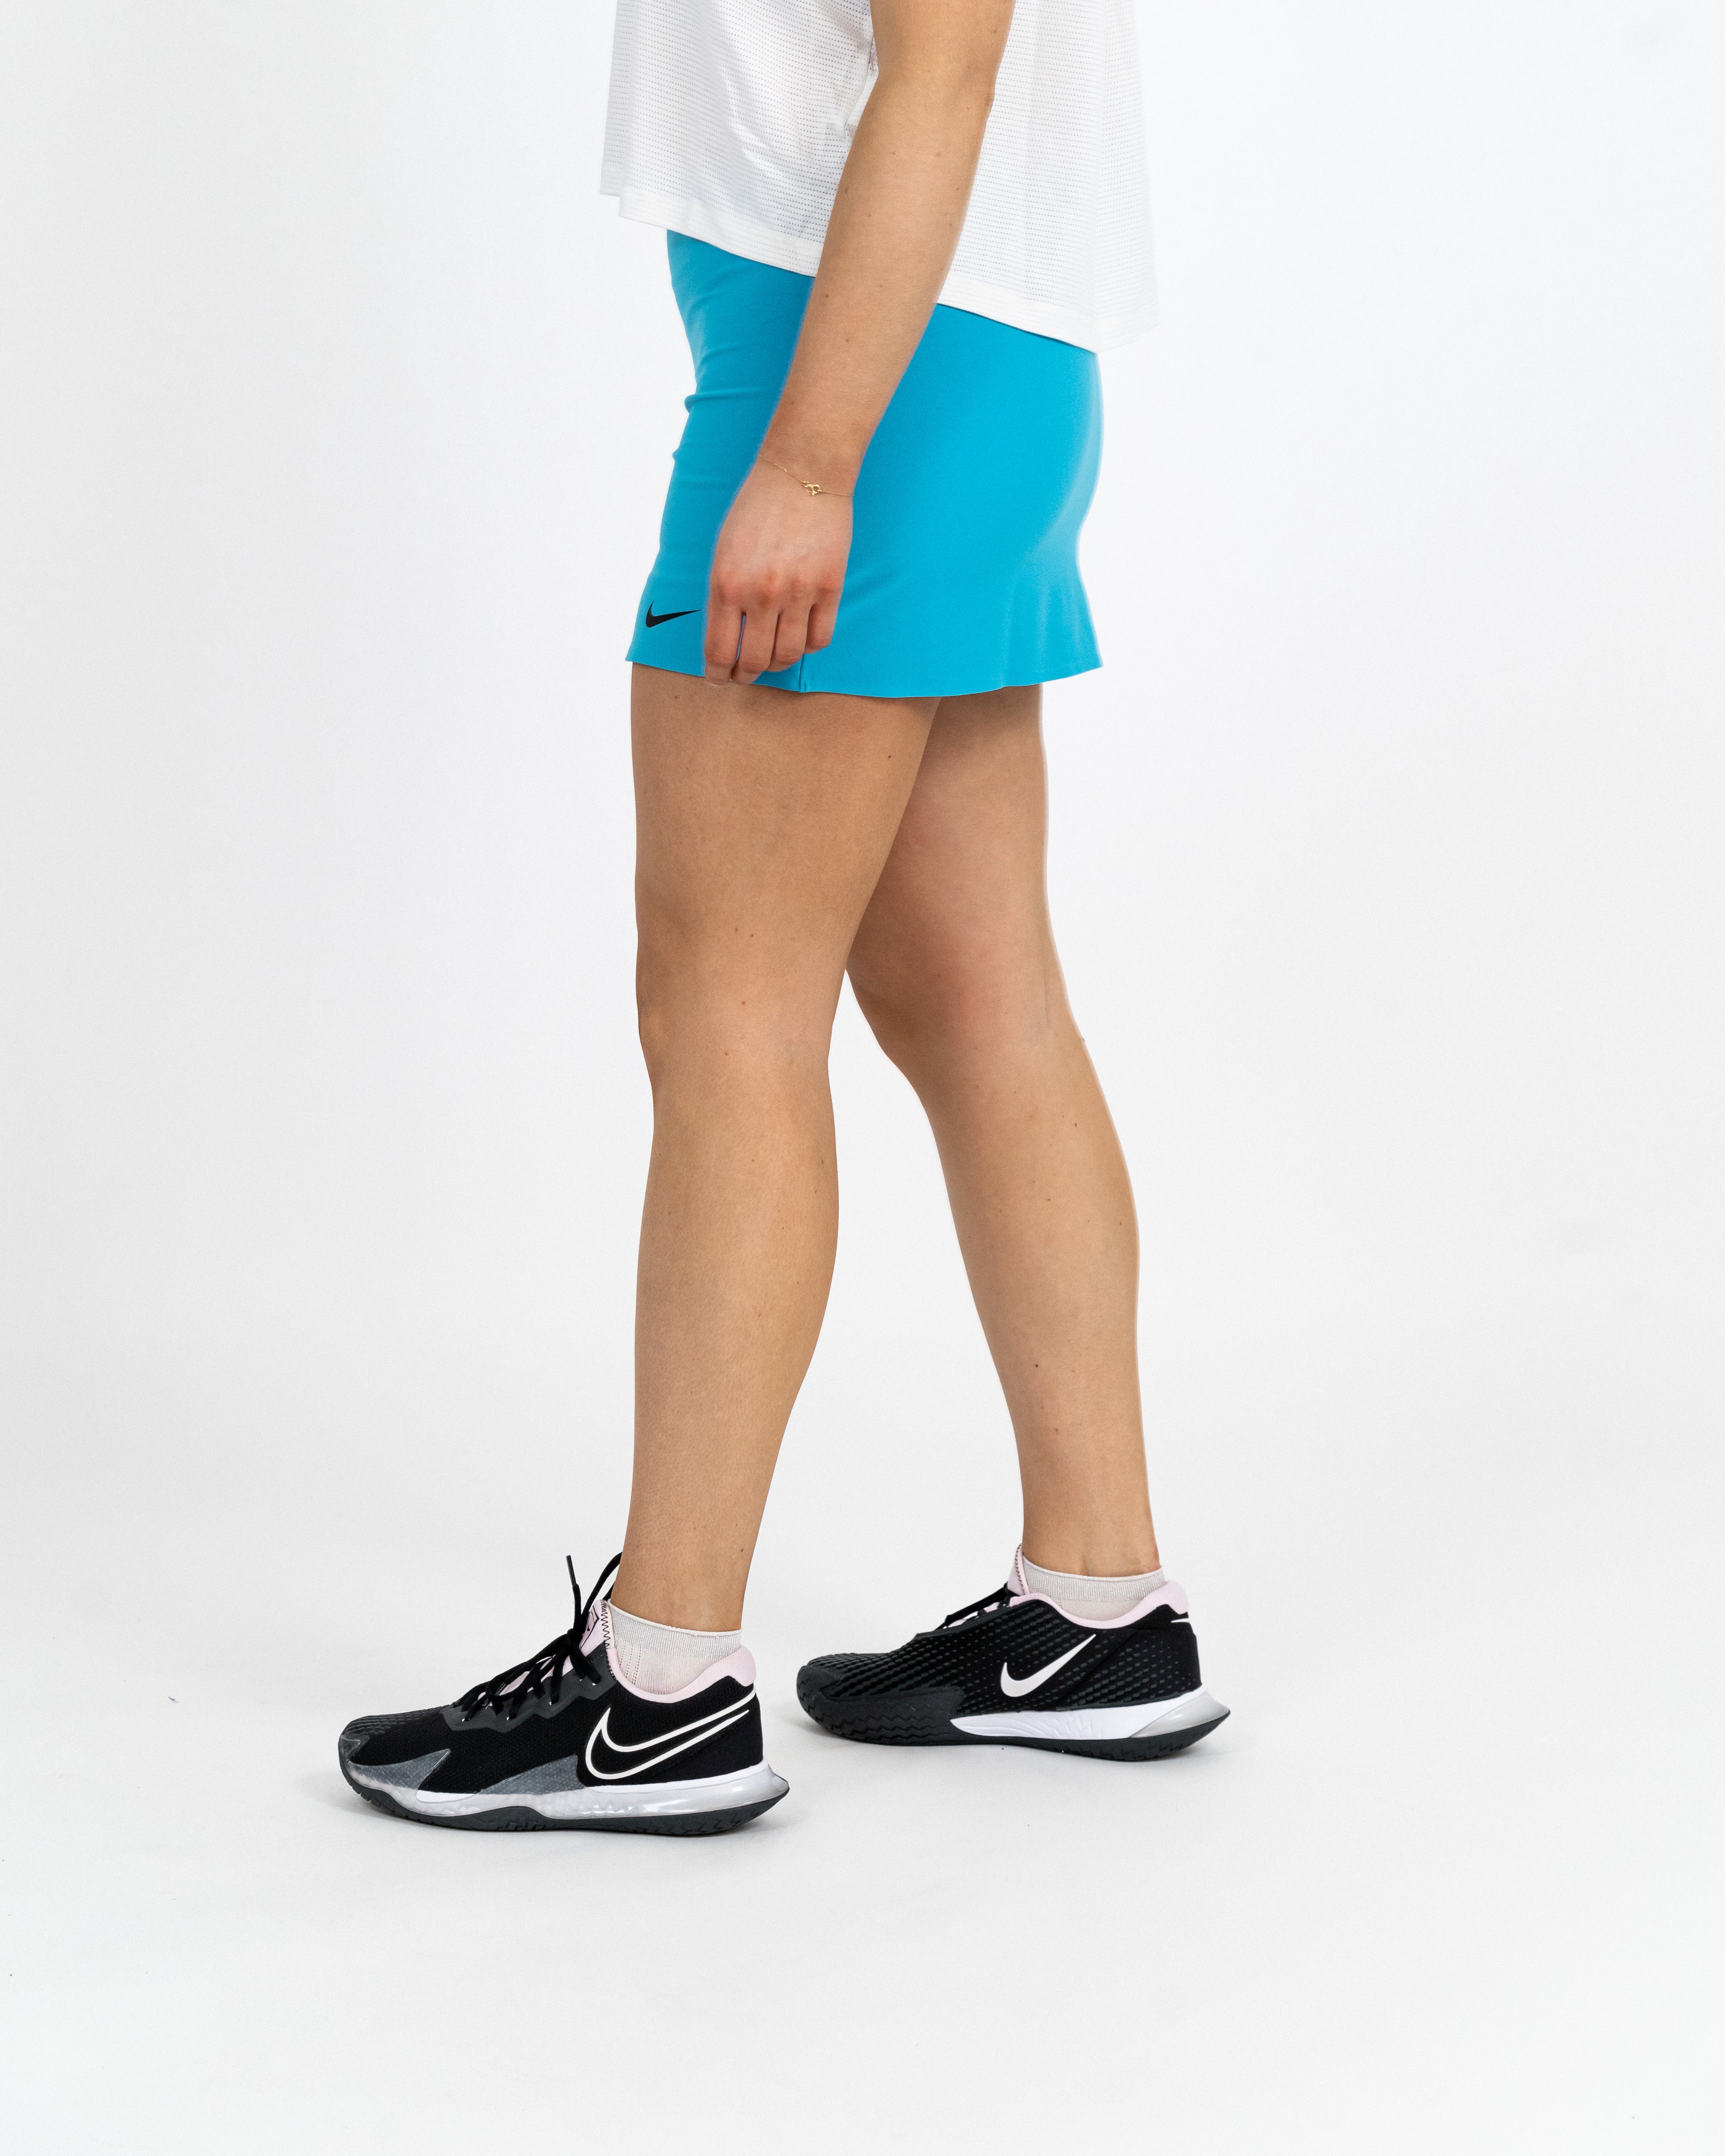 Nike Pure Spin Skirt Tyrkis